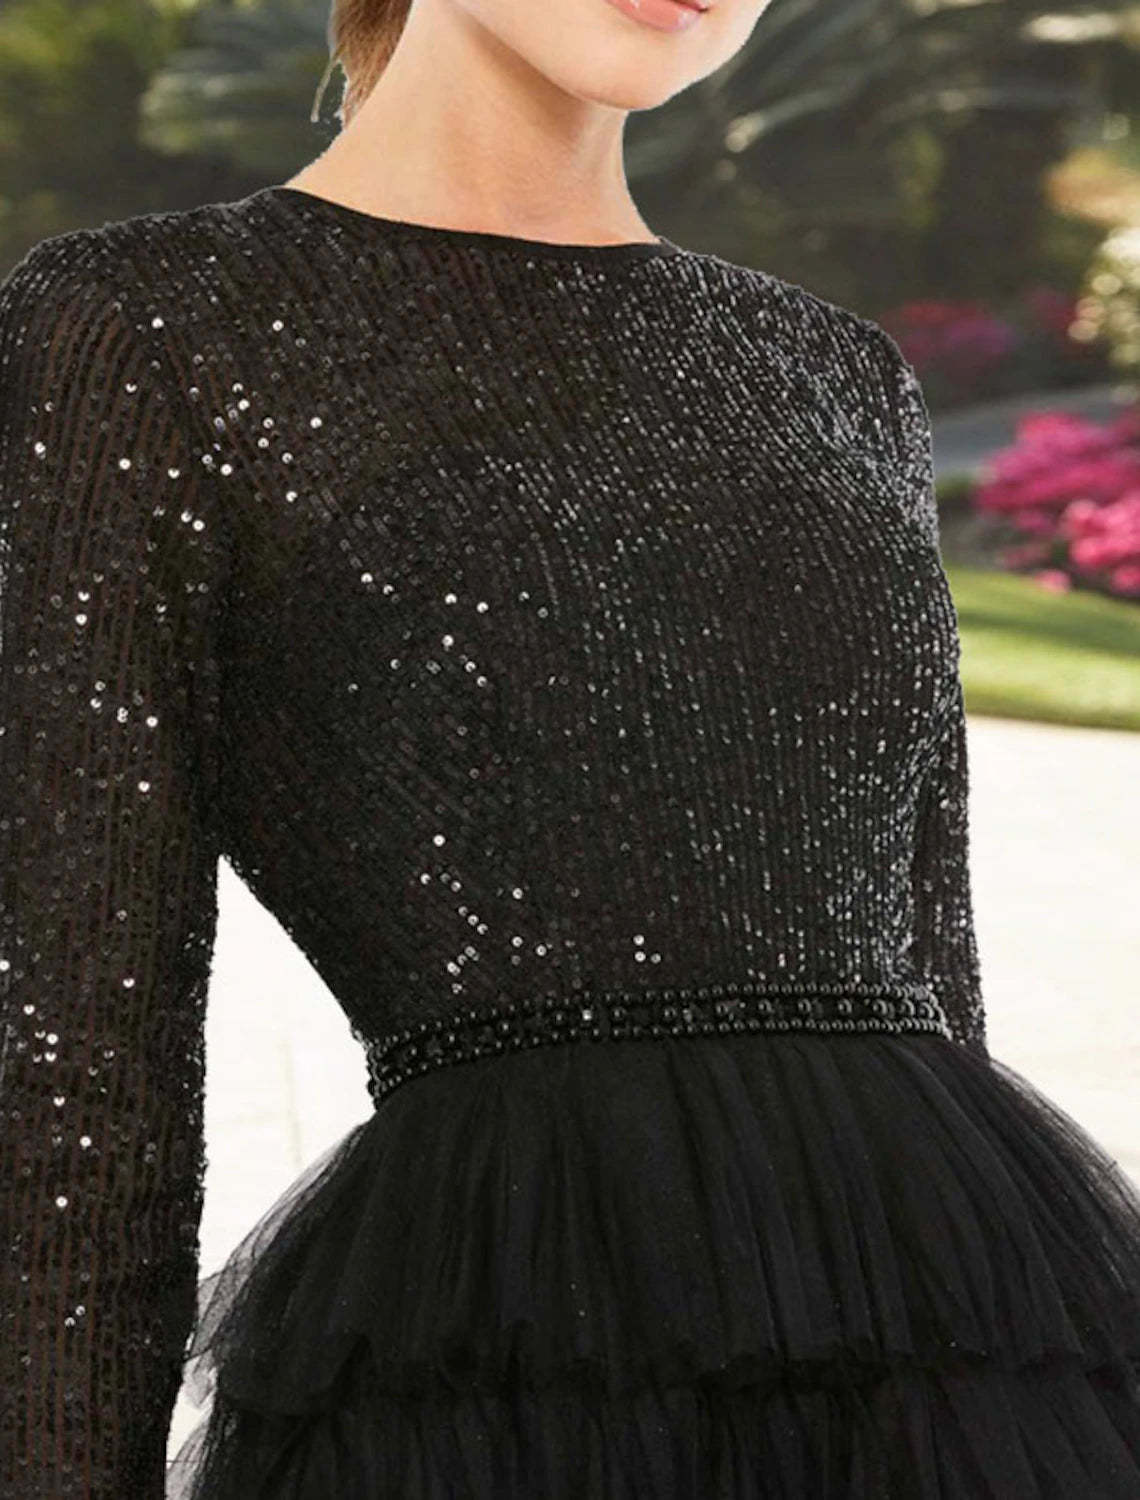 A-Line Cocktail Dresses Elegant Dress Wedding Guest Party Wear Tea Length Long Sleeve Jewel Neck Fall Wedding Guest Tulle with Sequin Tiered